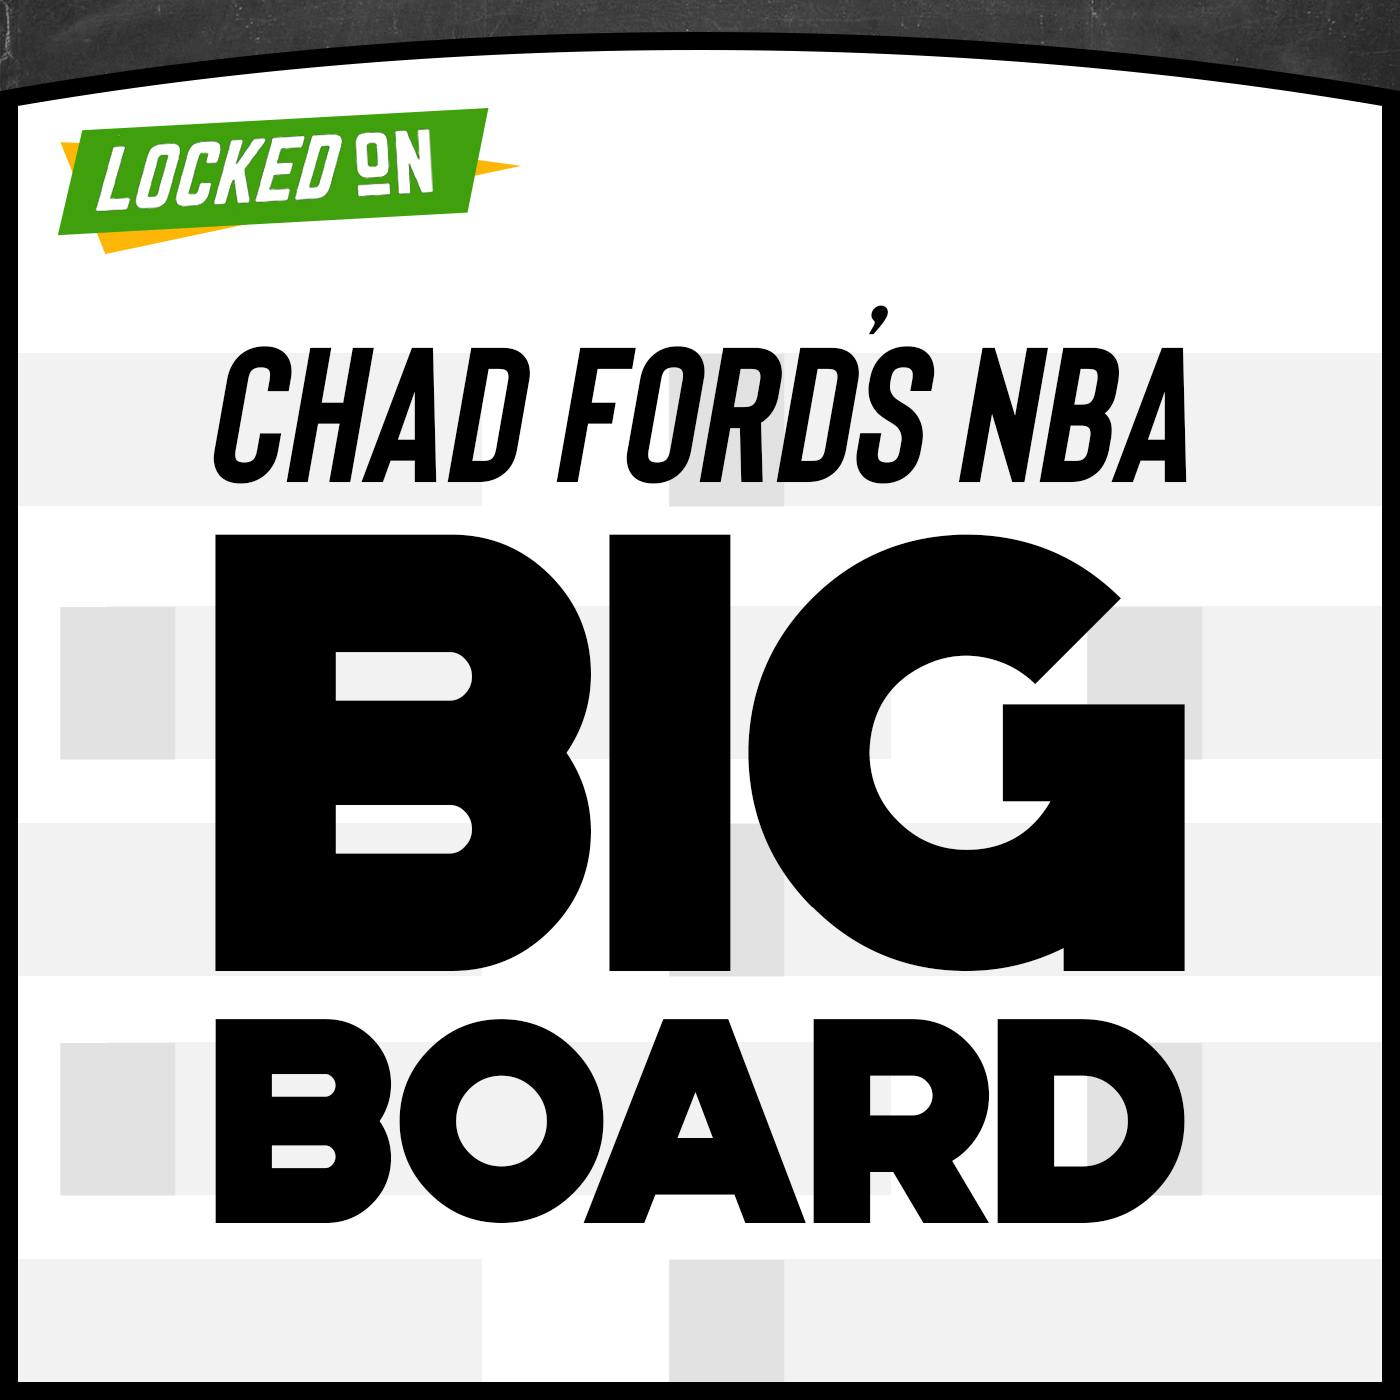 Chad Ford